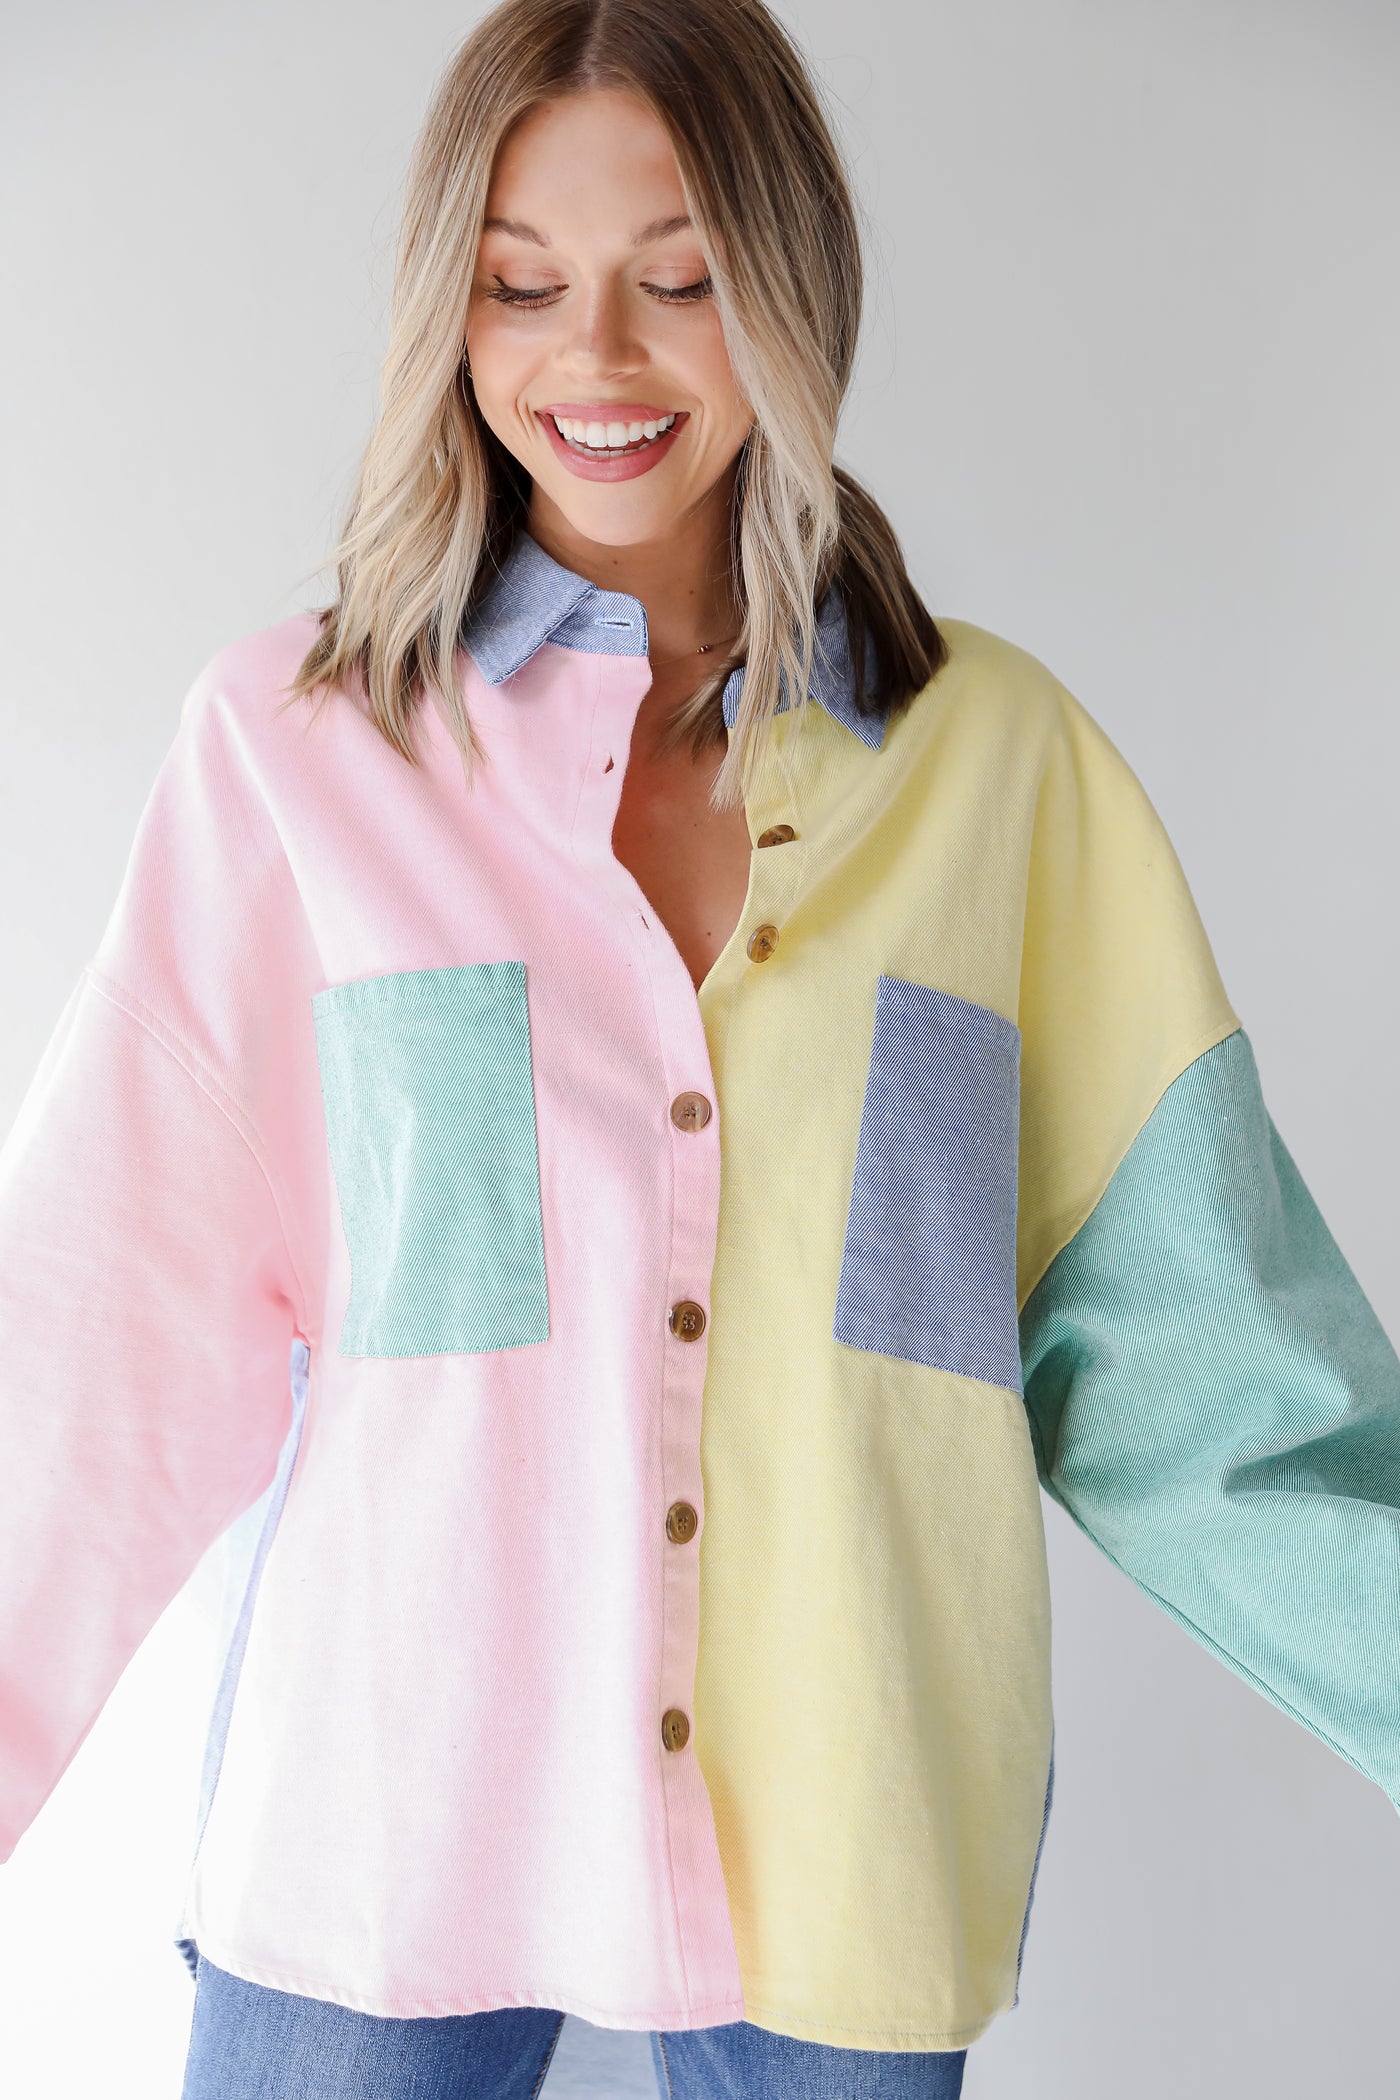 colorful jacket with longsleeve